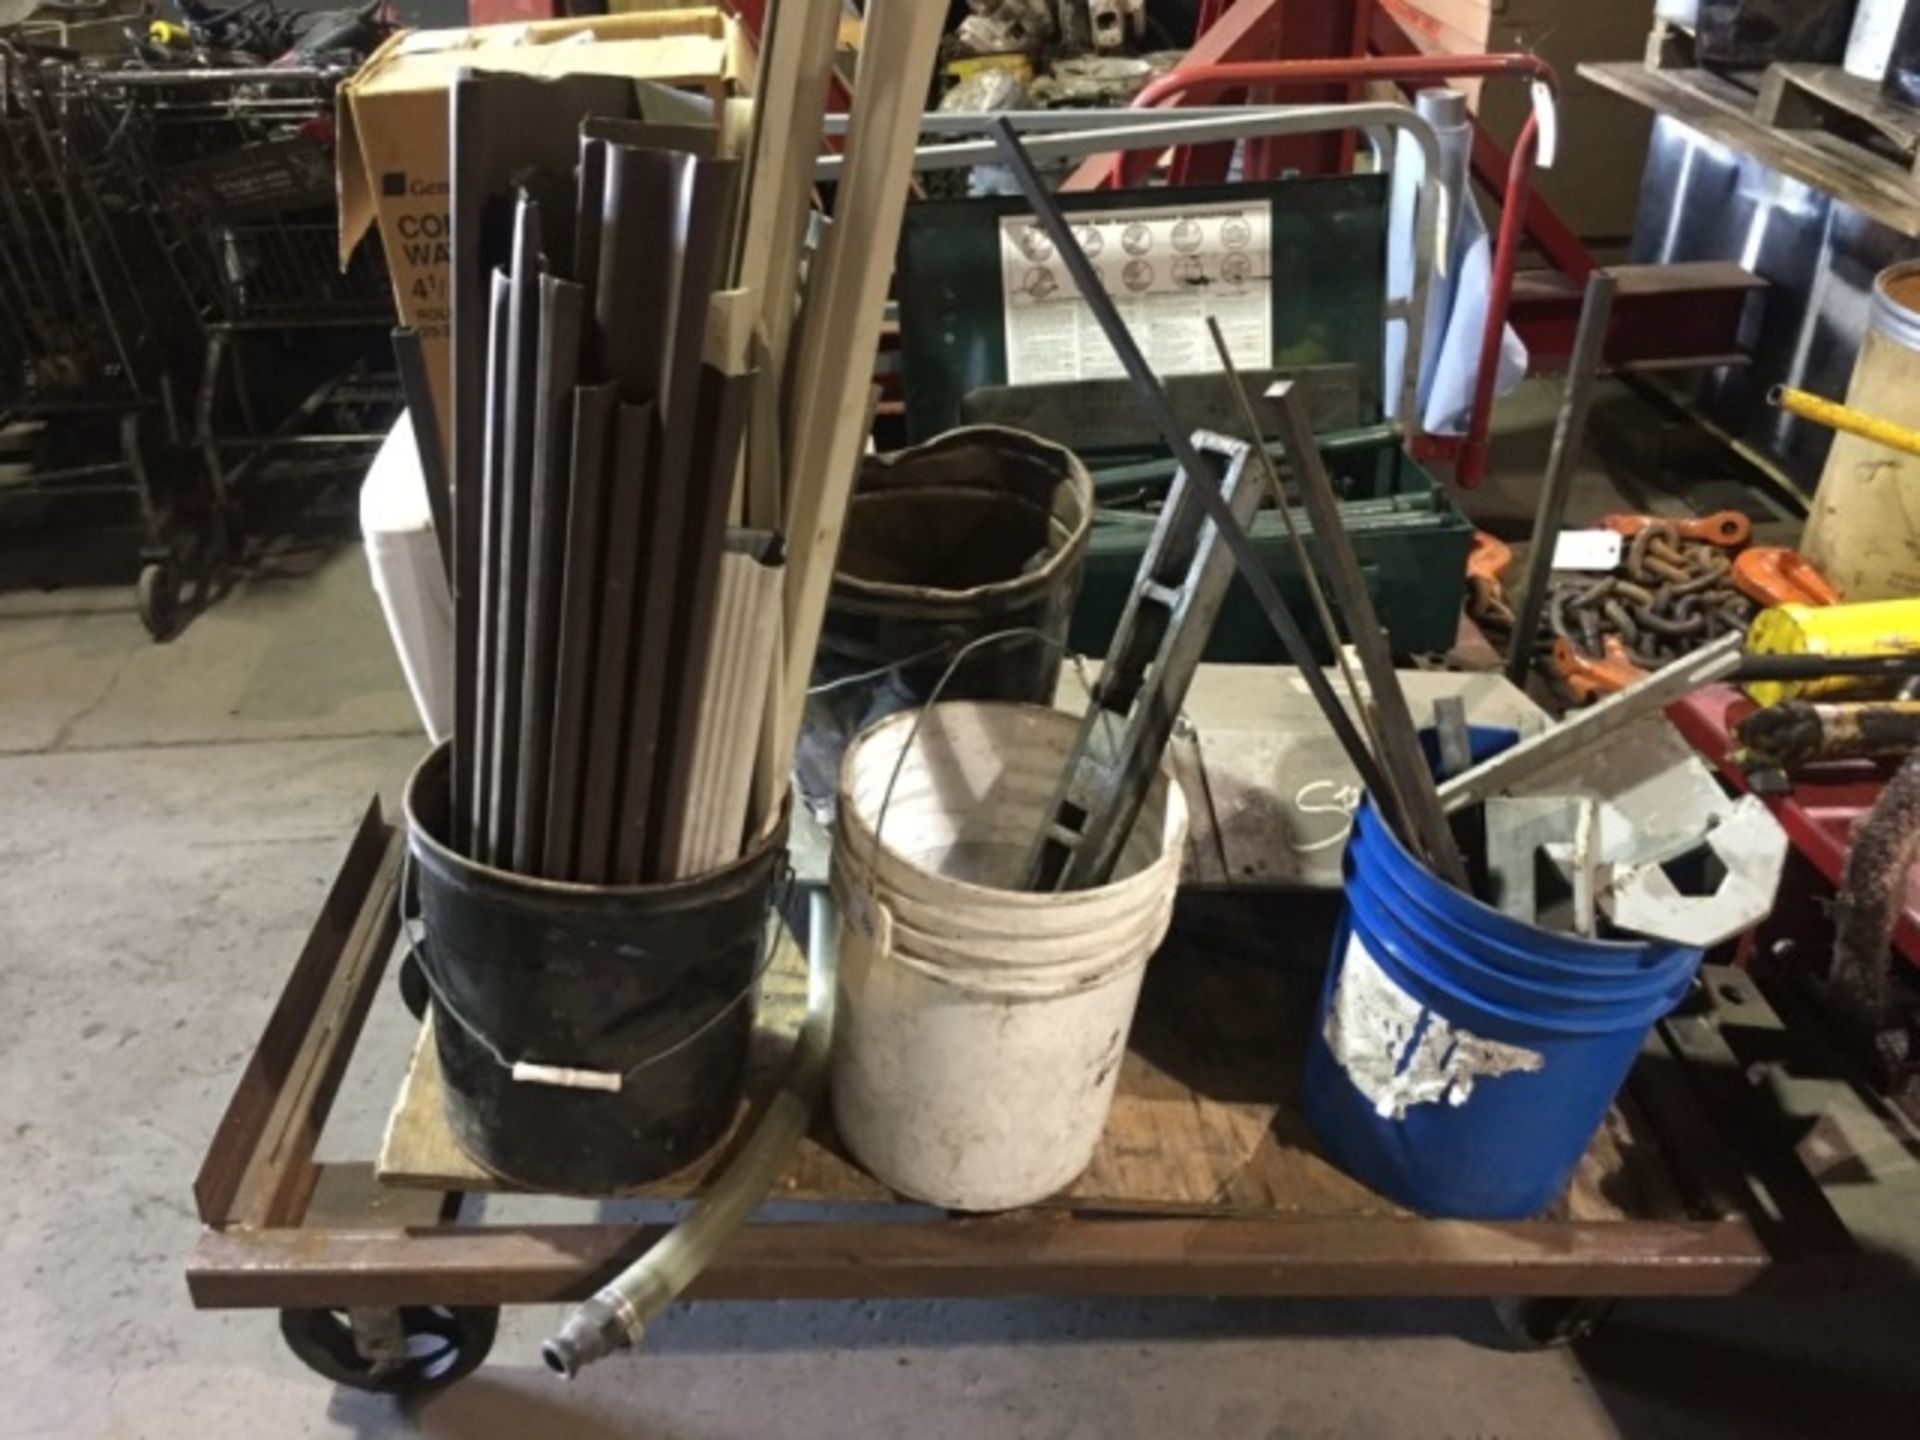 Metal rolling cart with various contents